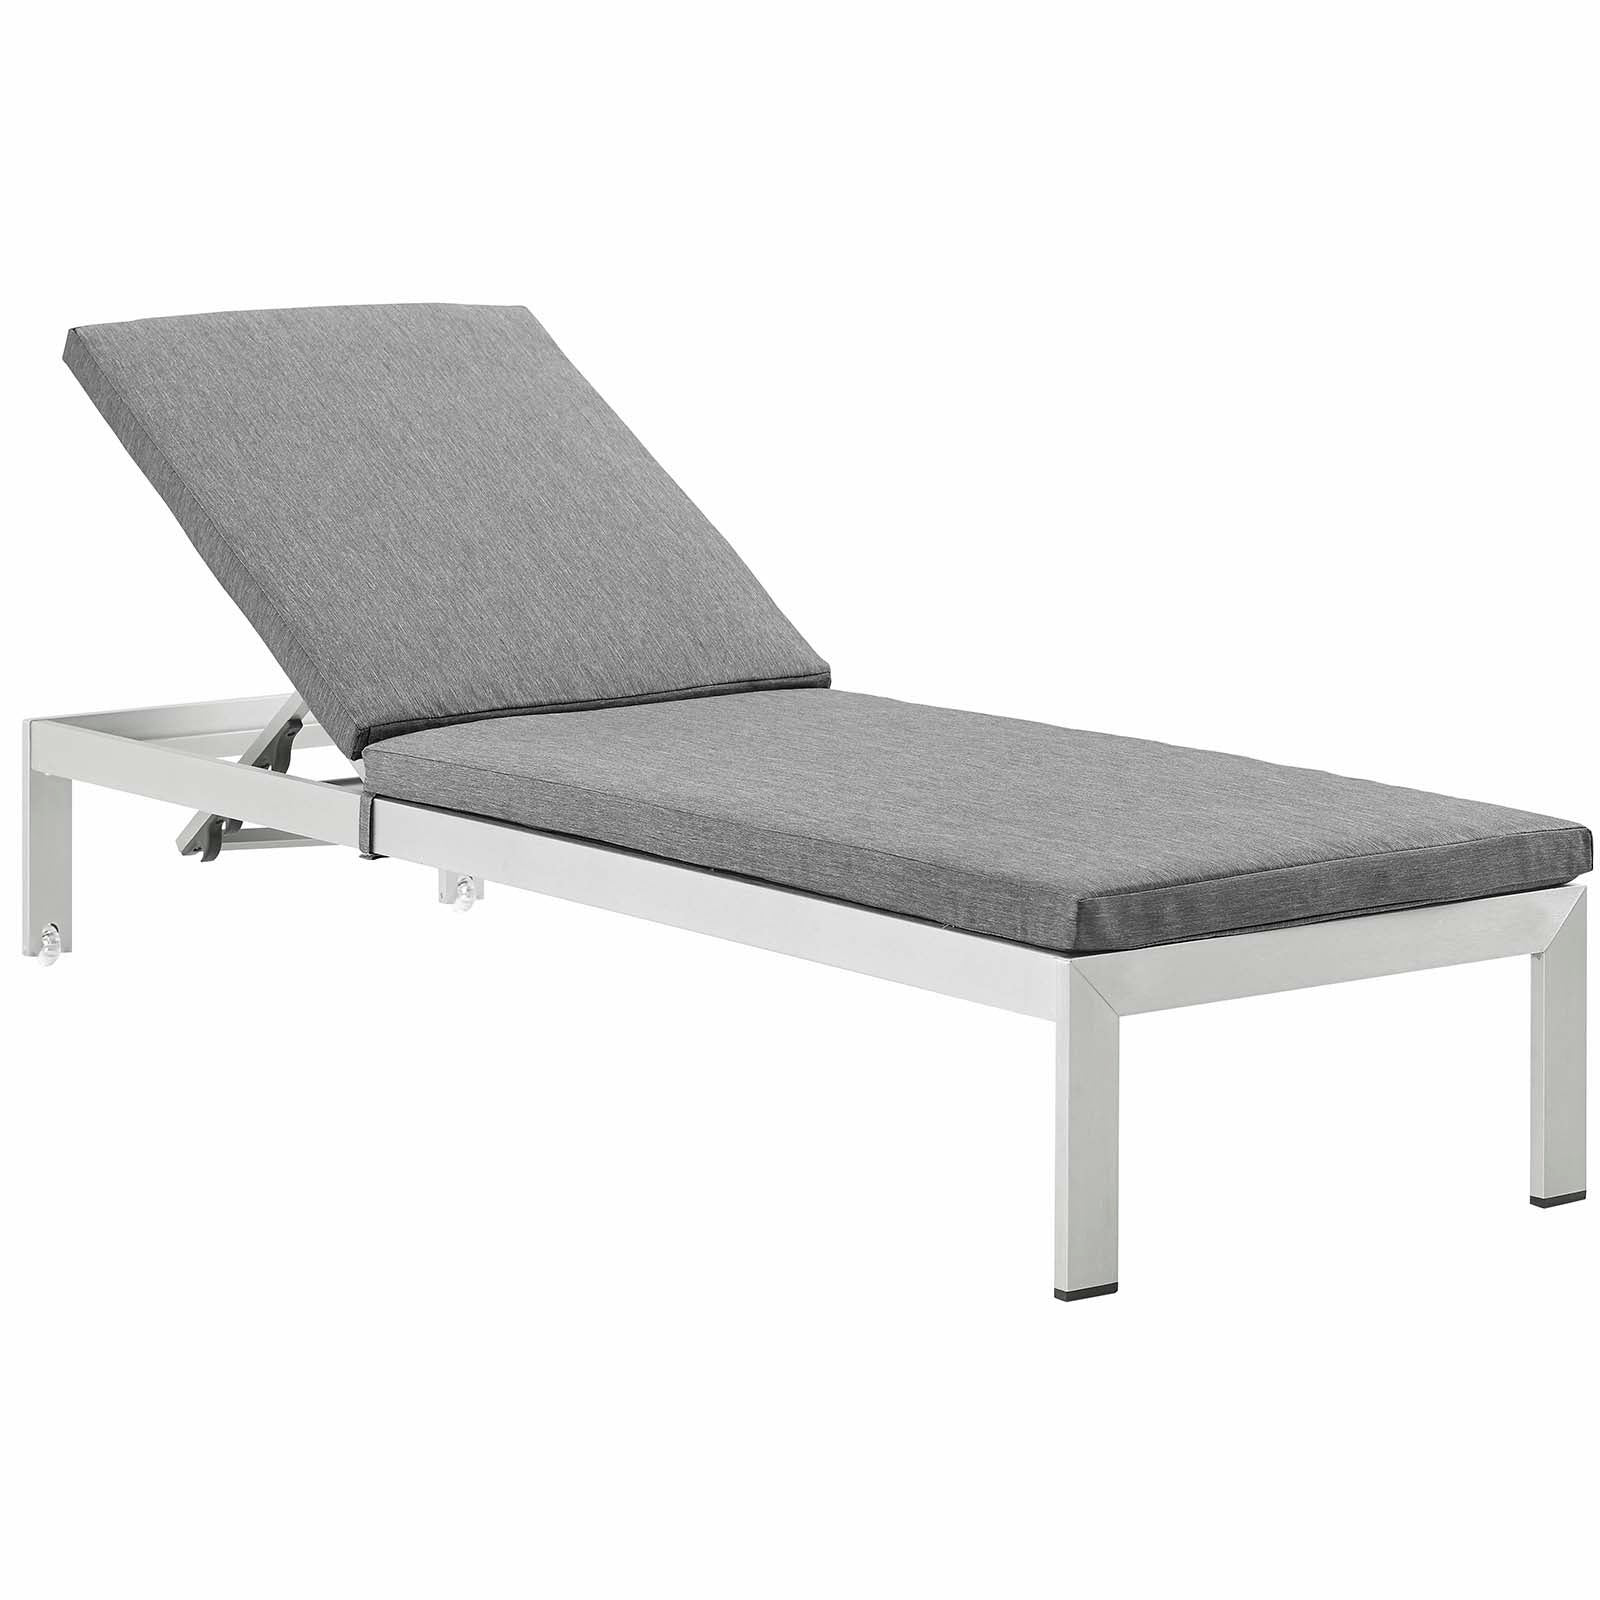 Modway Outdoor Loungers - Shore Chaise with Cushions Outdoor Patio Aluminum Silver Gray (Set of 2)